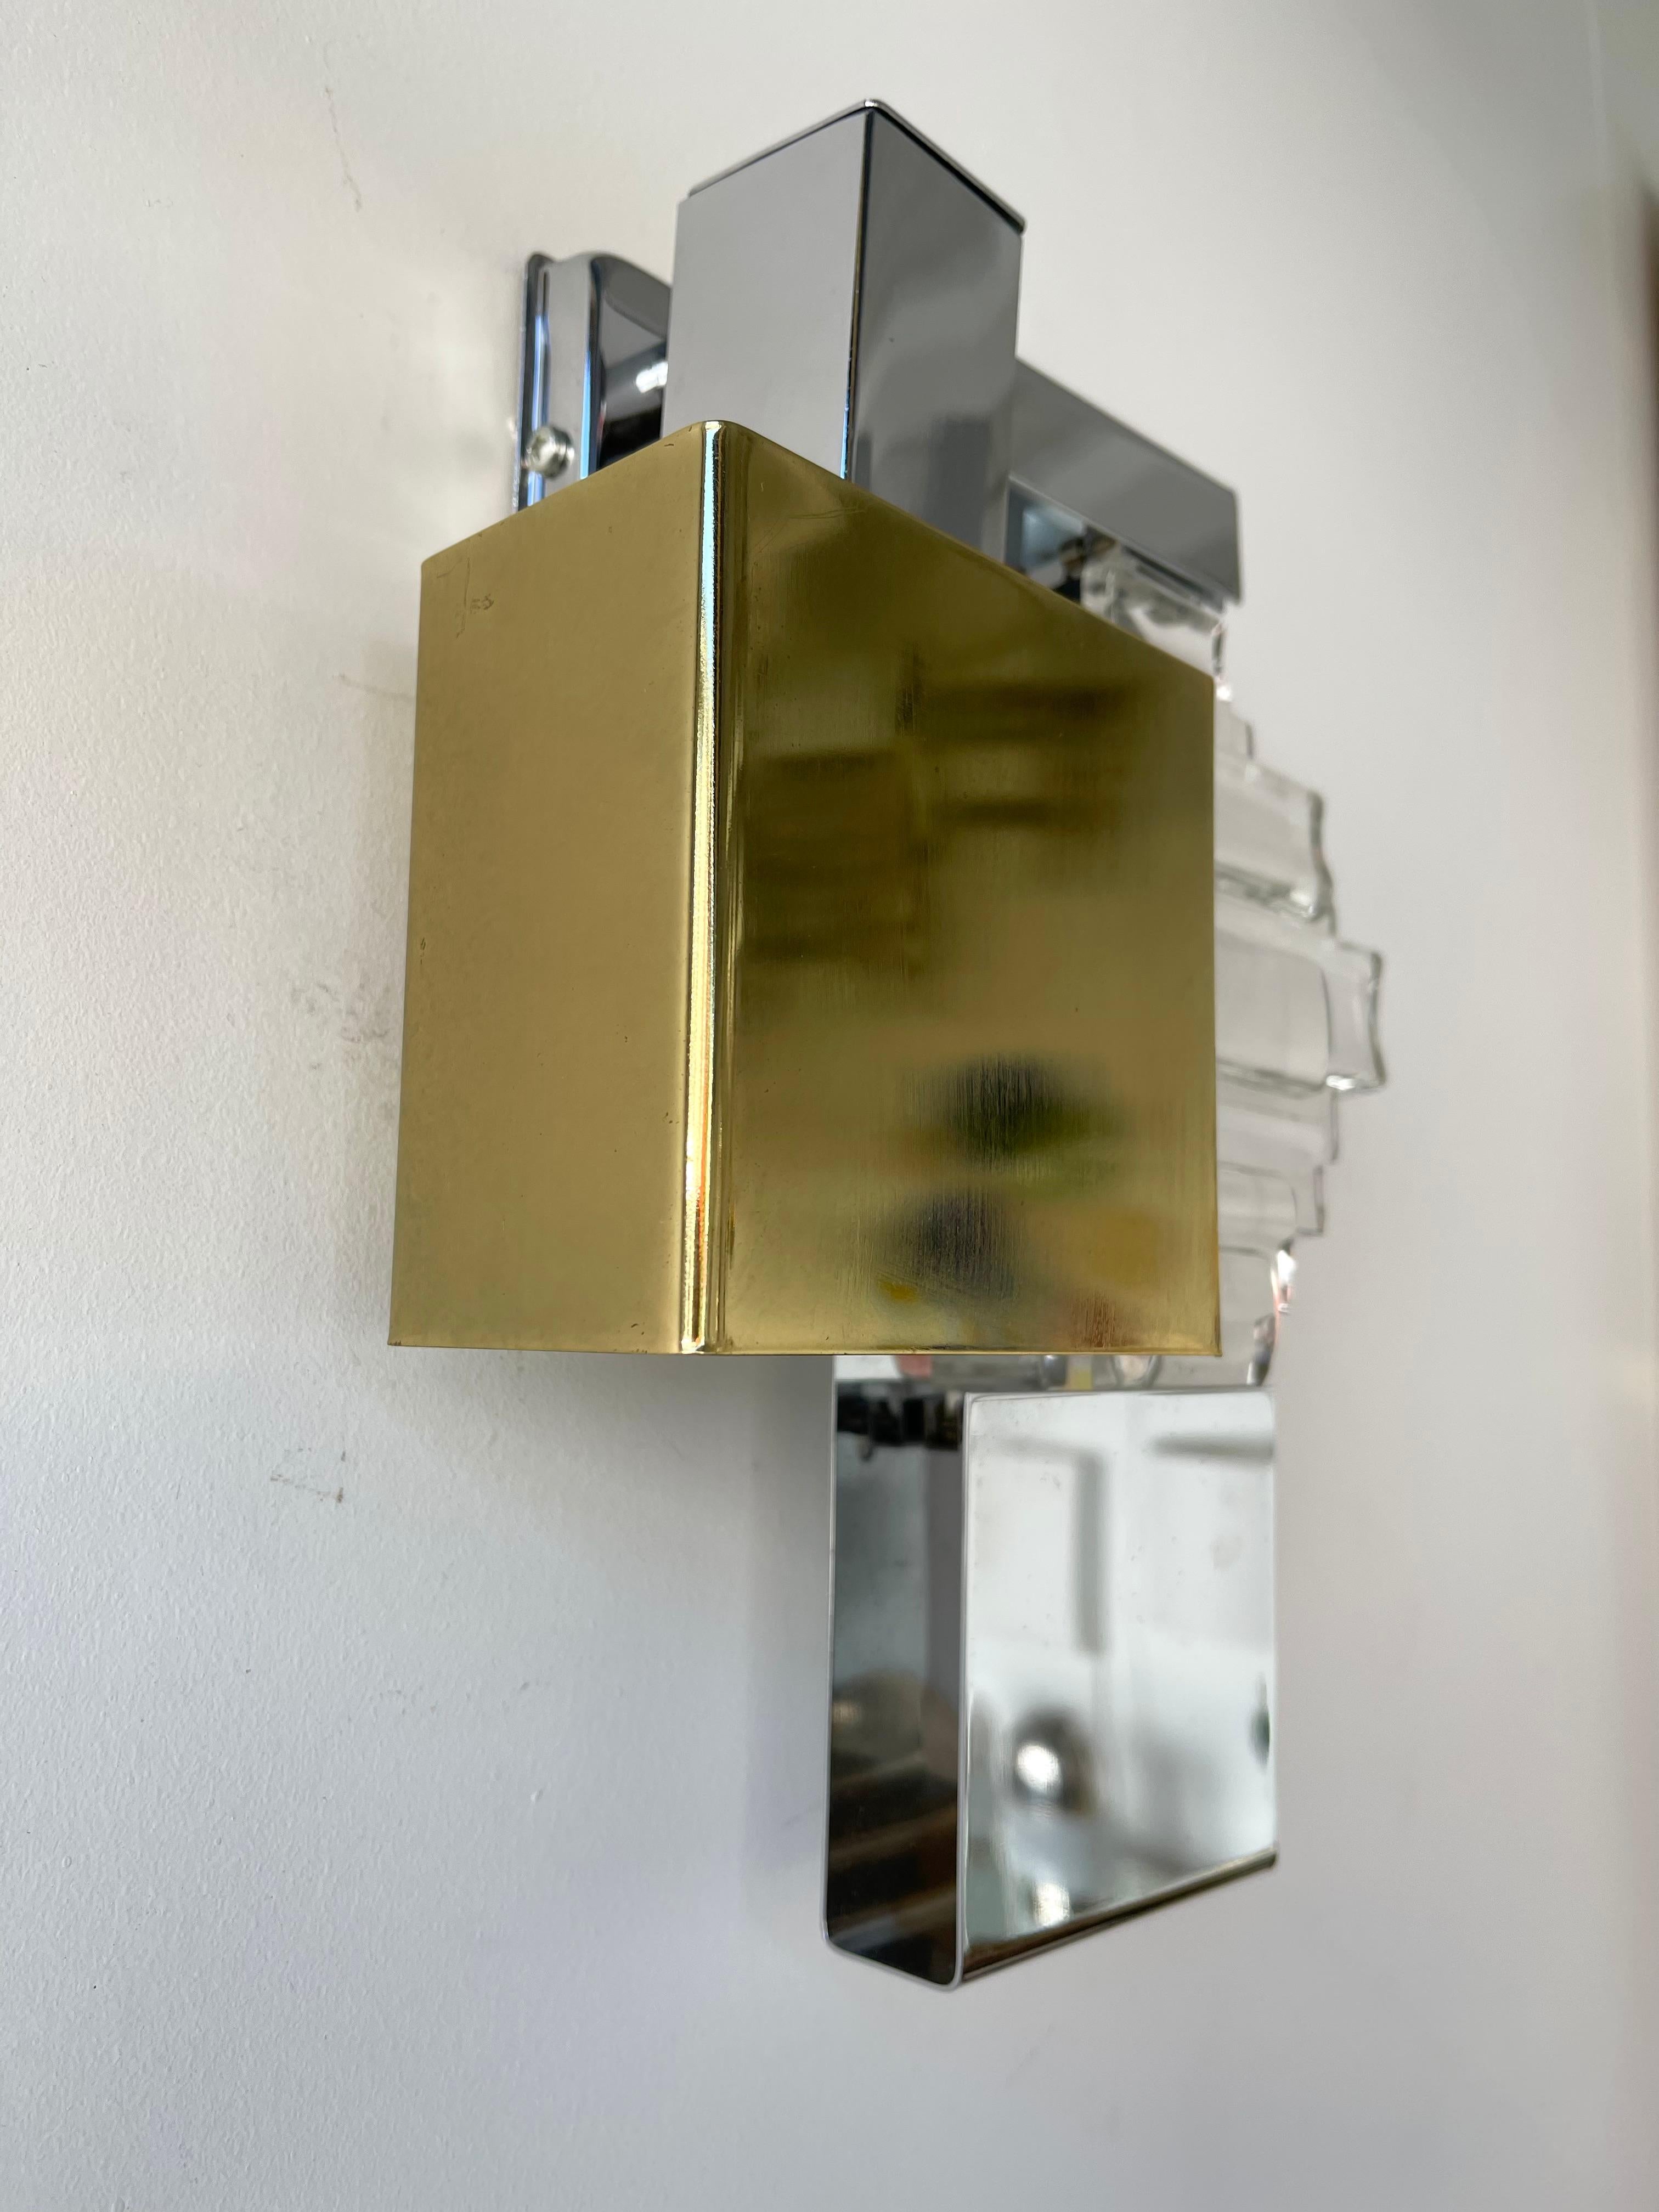 Pair of wall lamps lights sconces in metal chrome, brass and glass by Sciolari for the editor Stilkronen. 2 positions possible on wall. Famous design like Reggiani, Stilux, Targetti Sankey.